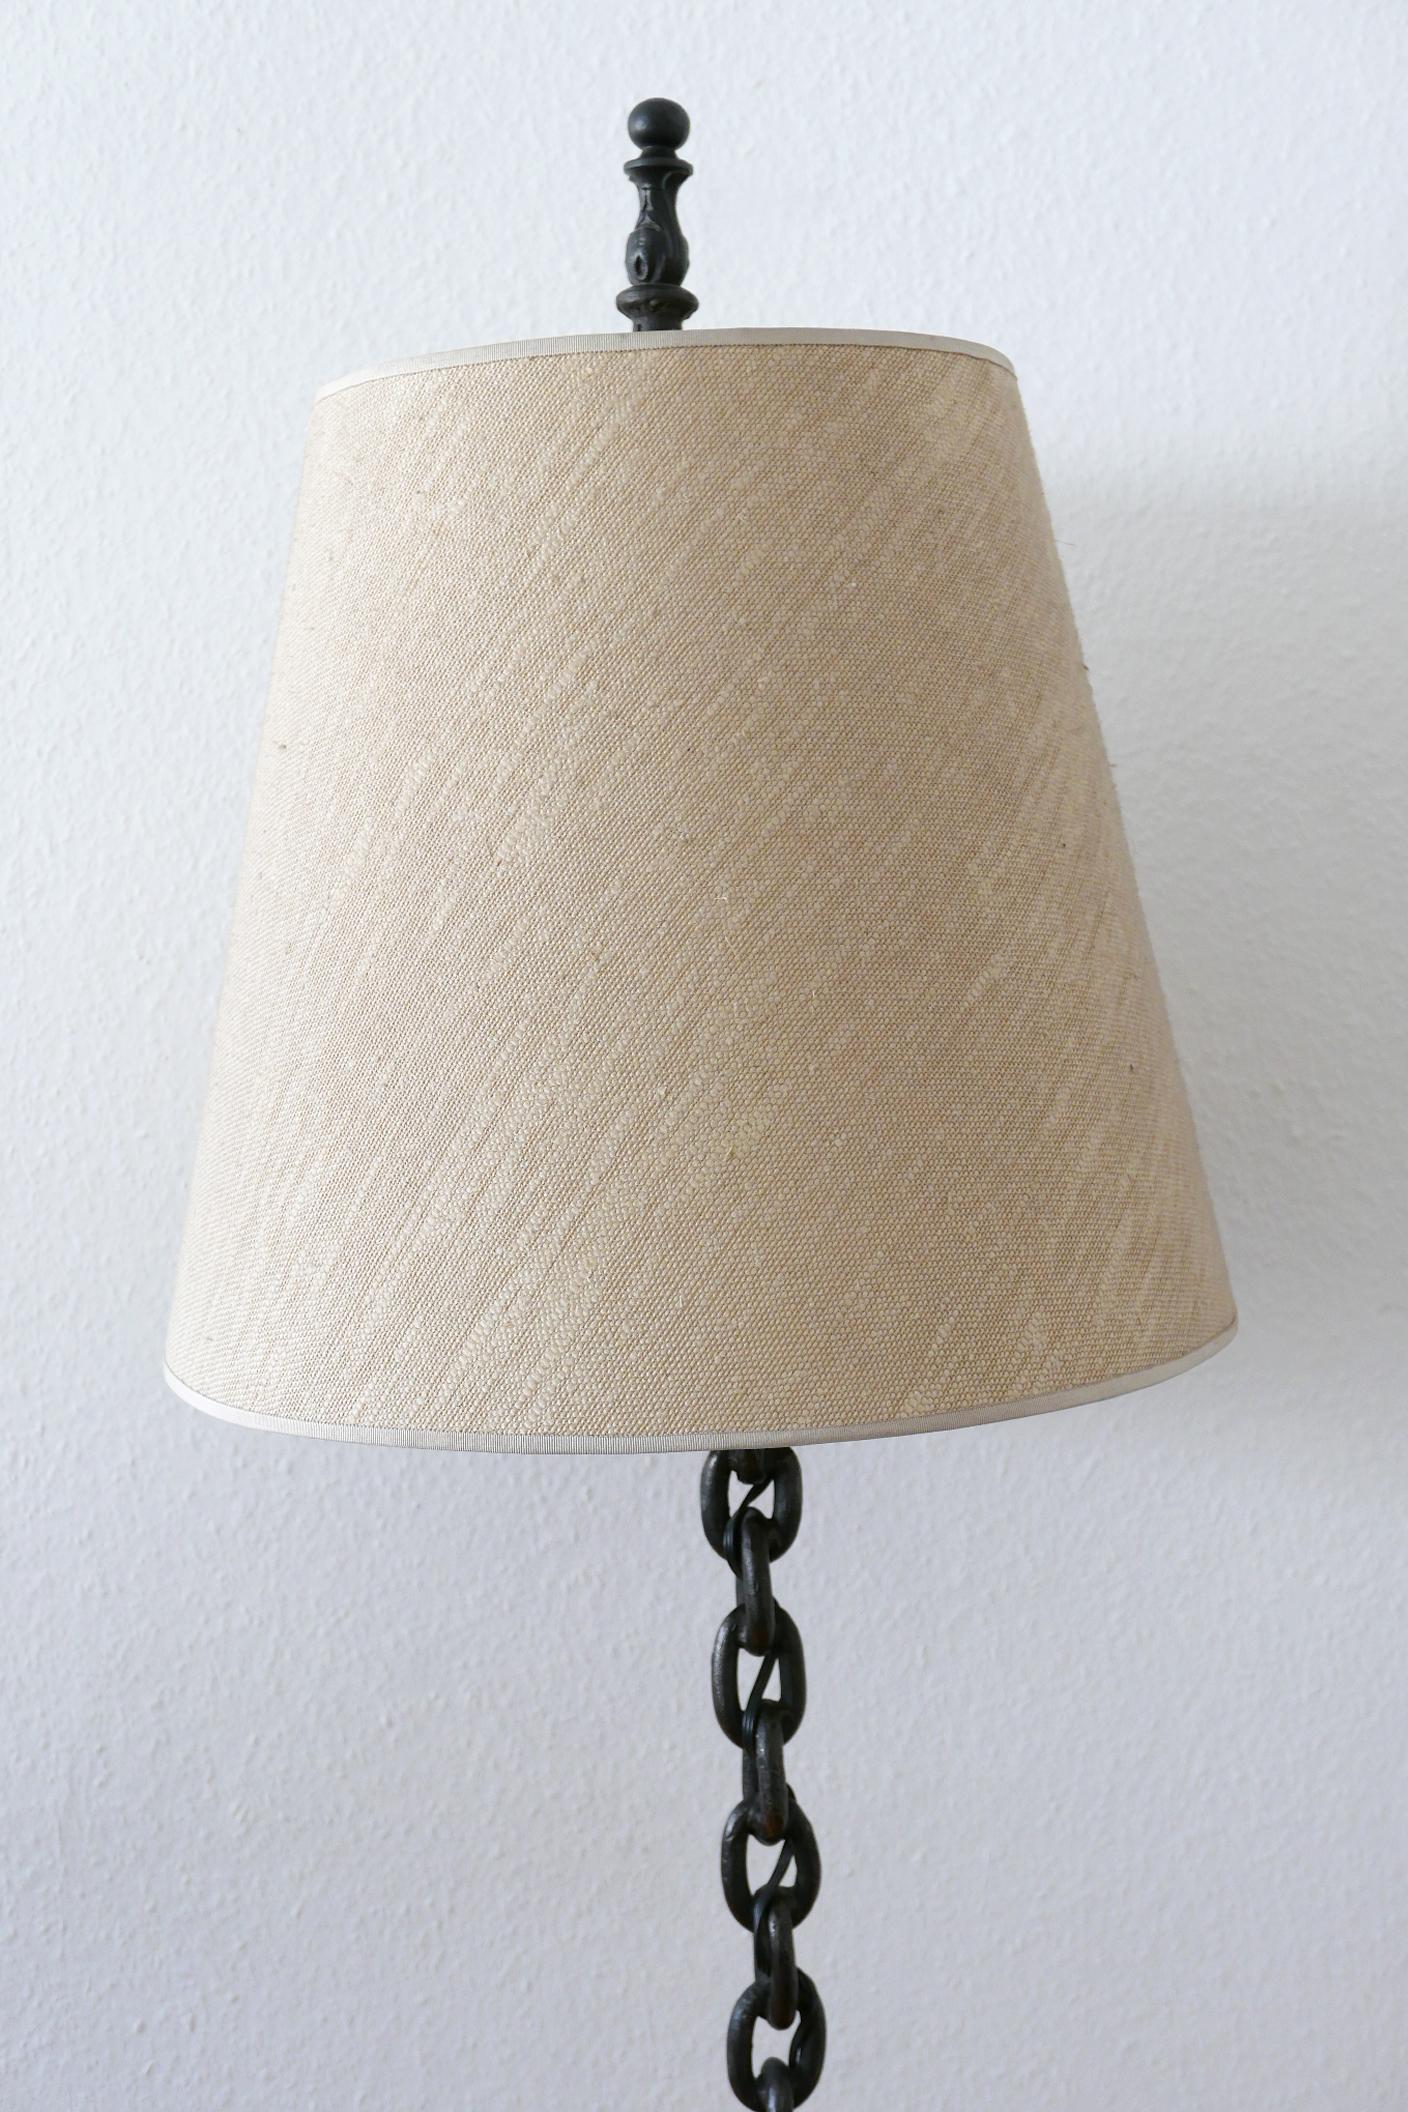 Mid-Century Modern Franz West Style Wrought Iron Chain Floor Lamp 1960s, Germany For Sale 4